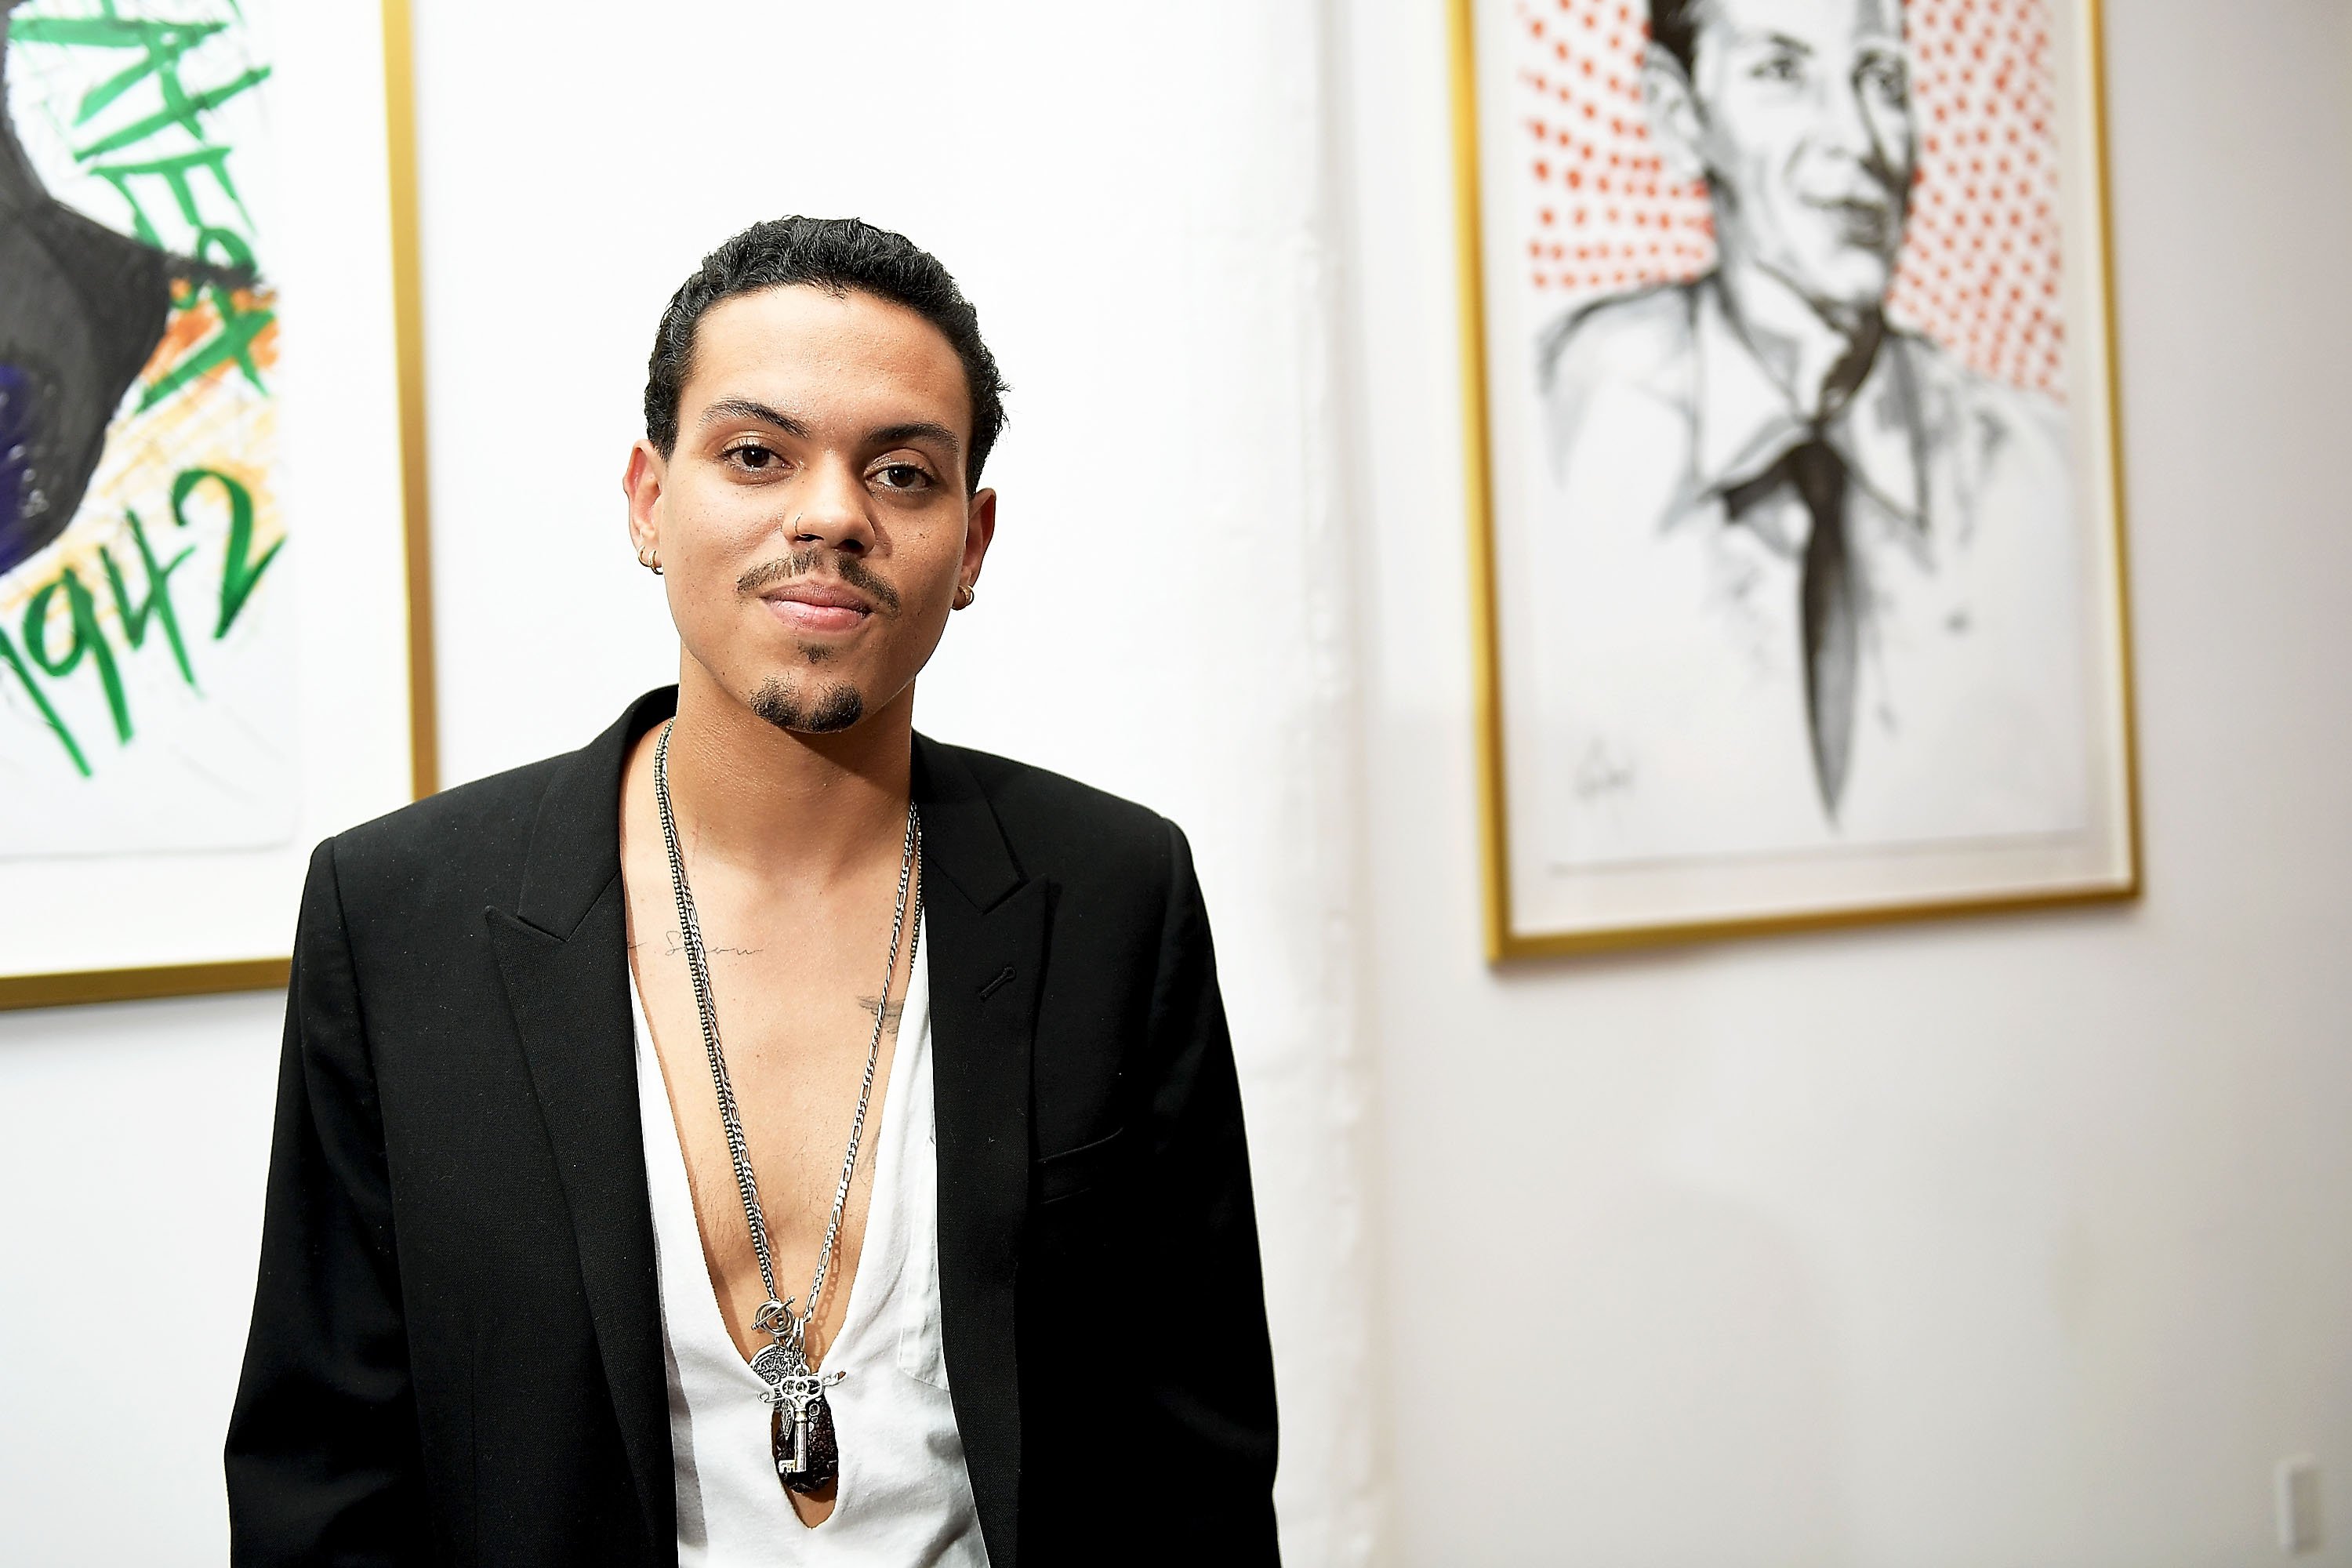 Evan Ross at "Art with a Cause" in 2017 in Los Angeles, California. Source: Getty Images